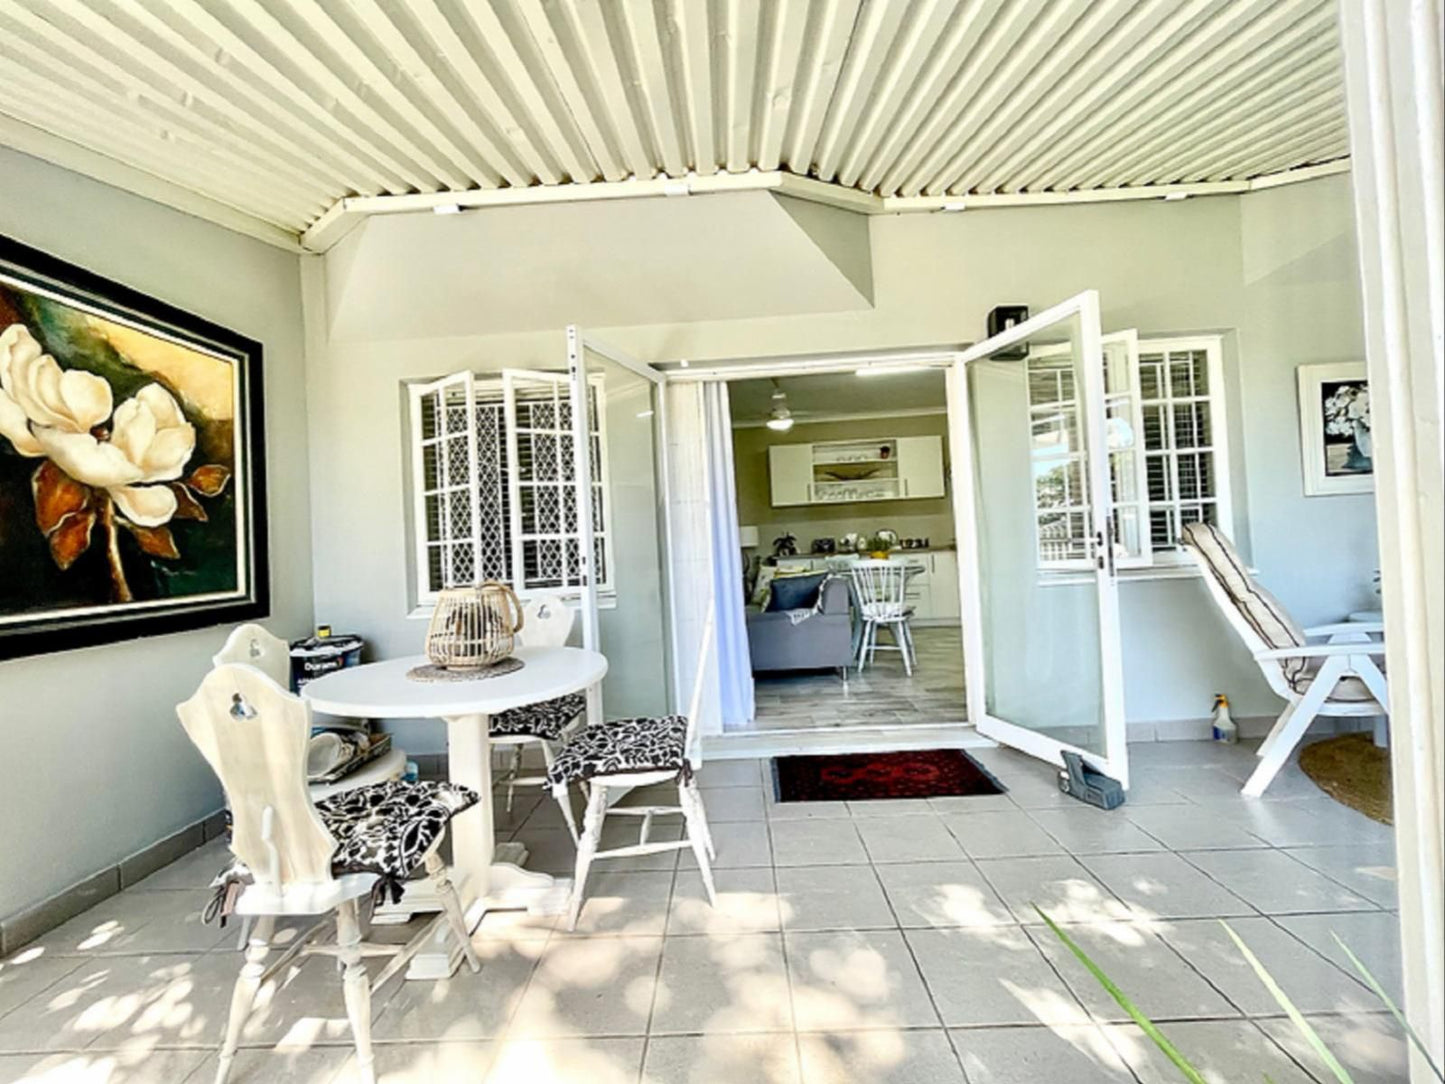 Ballito Central Pet Friendly Home Ballito Kwazulu Natal South Africa House, Building, Architecture, Living Room